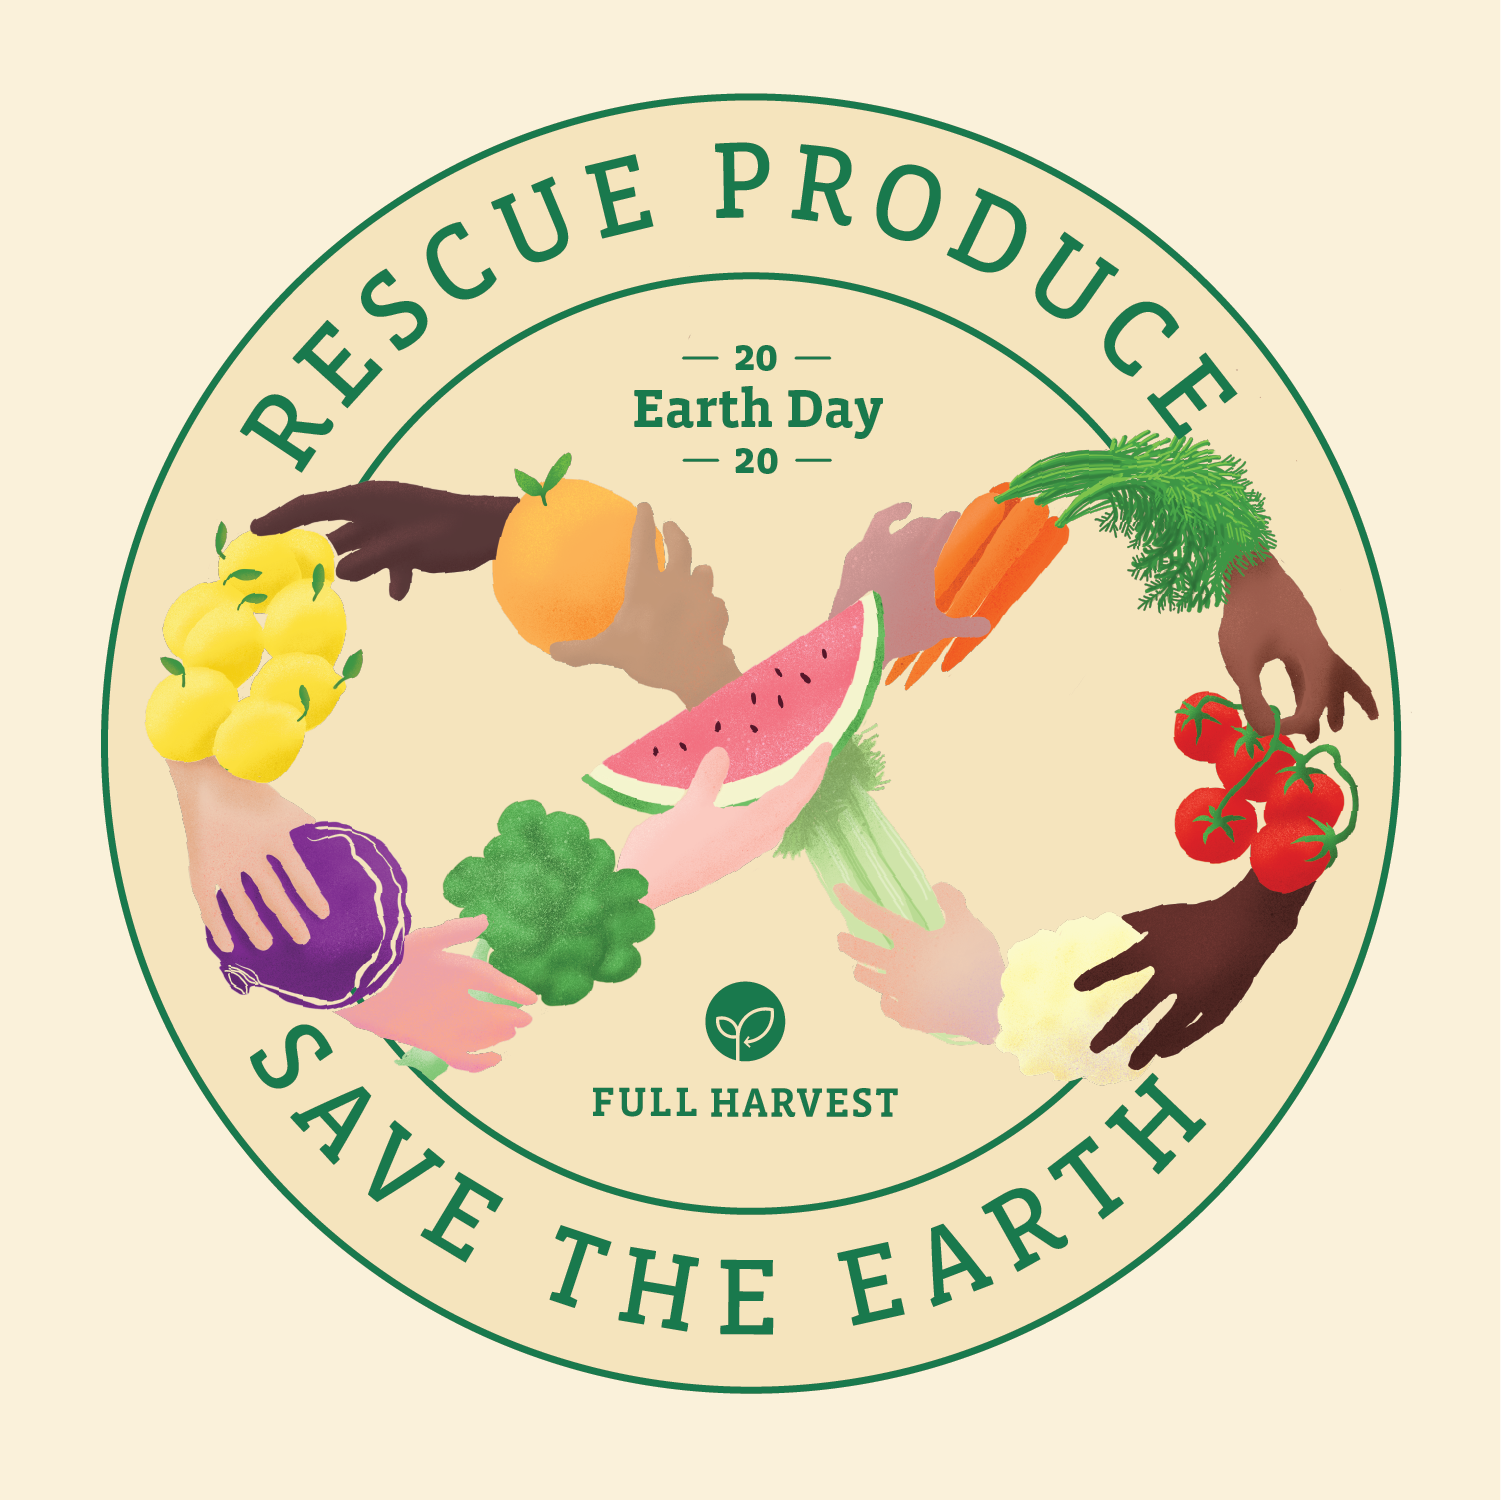 Rescue Produce Save the Earth Full Harvest